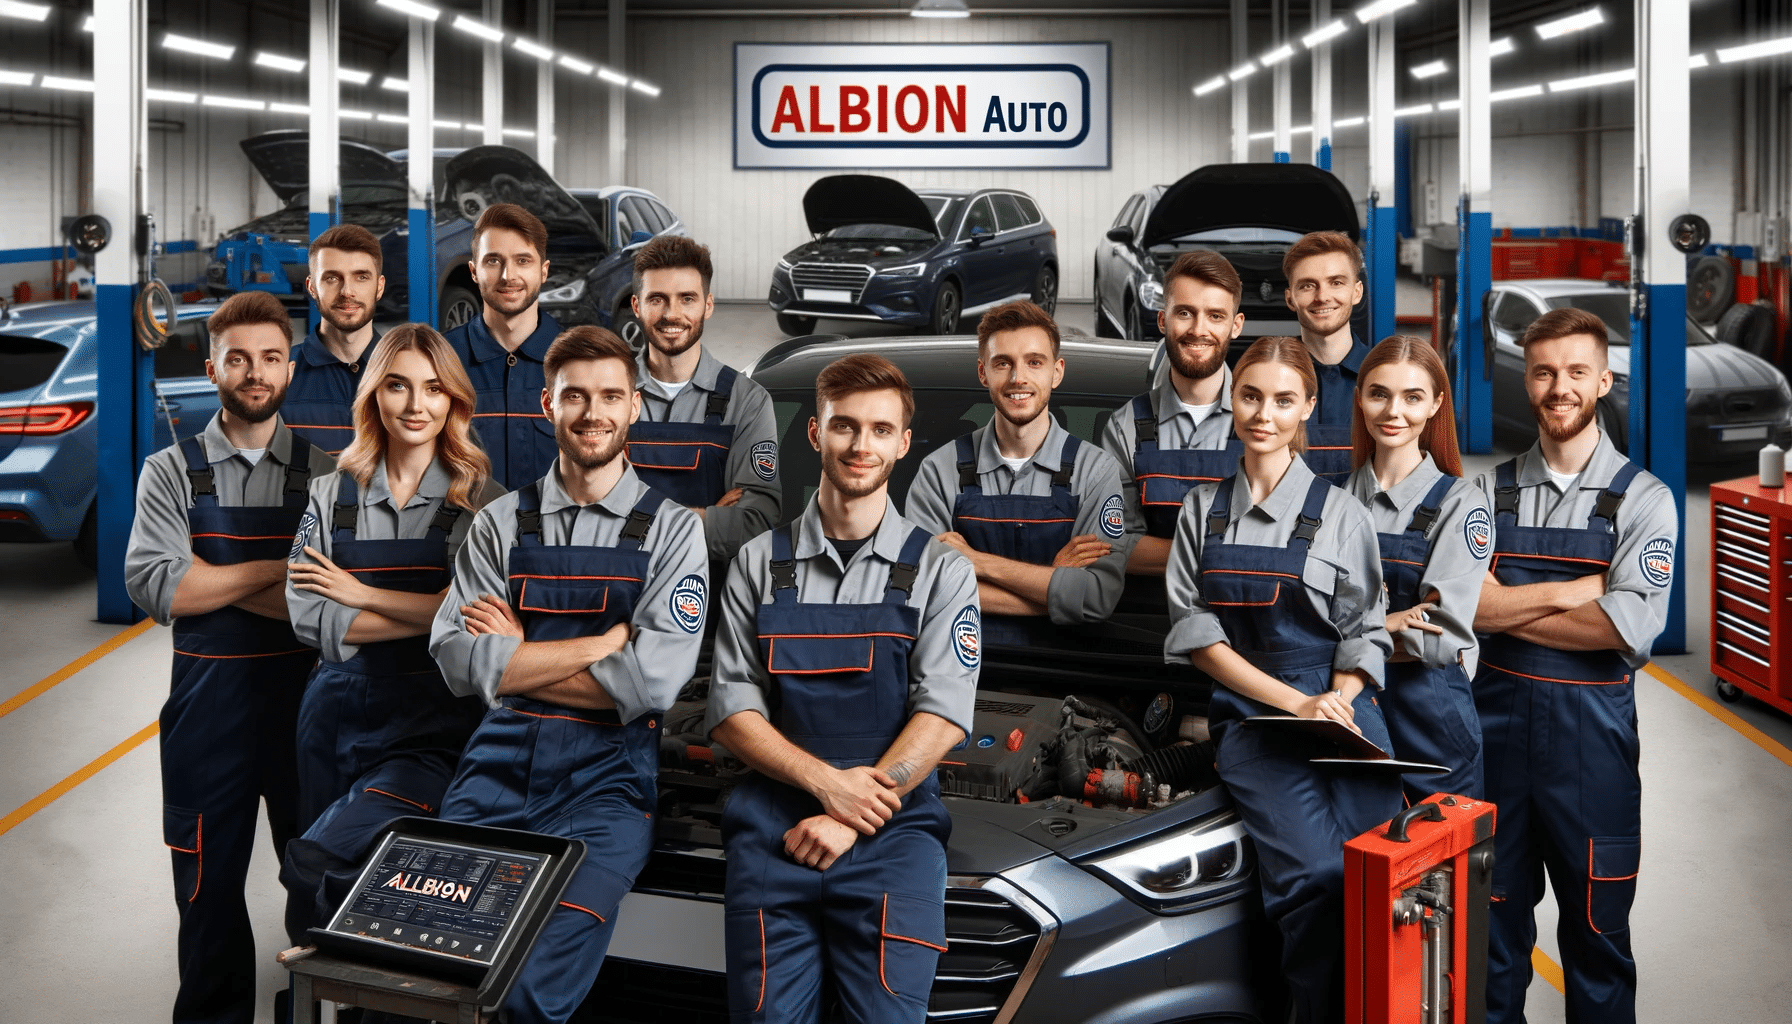 an Image Showing a Team of Skilled Mechanics at Albion Auto Working Together on a Fleet of Vehicles the Mechanics Diverse in Gender and Ethnicity